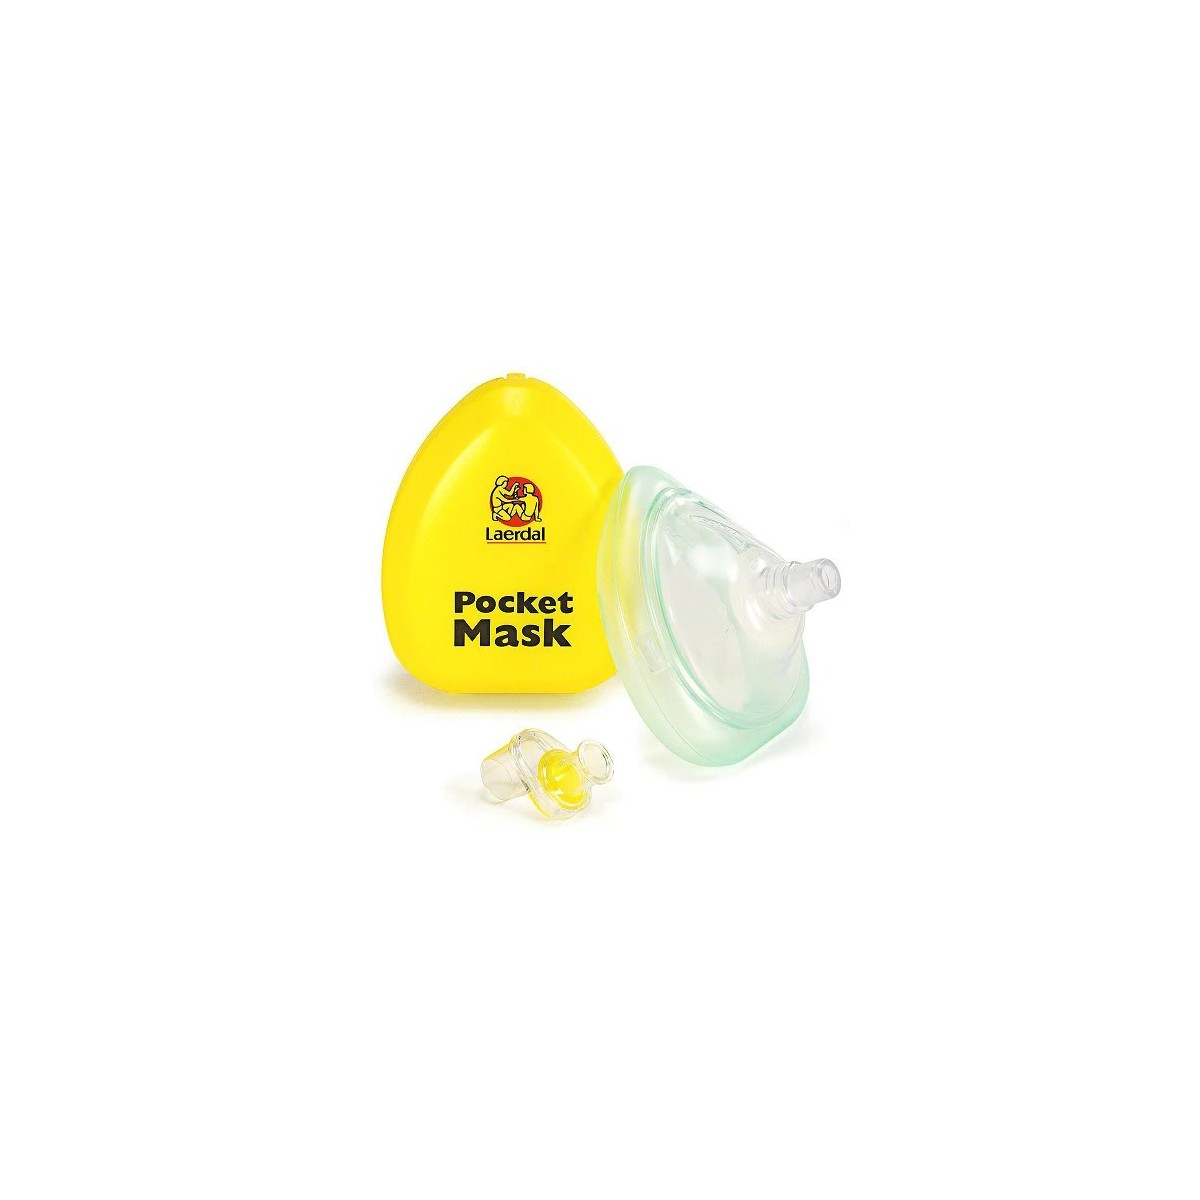 Laerdal Pocket Mask w/o Gloves and Wipe in Yellow Hard Case